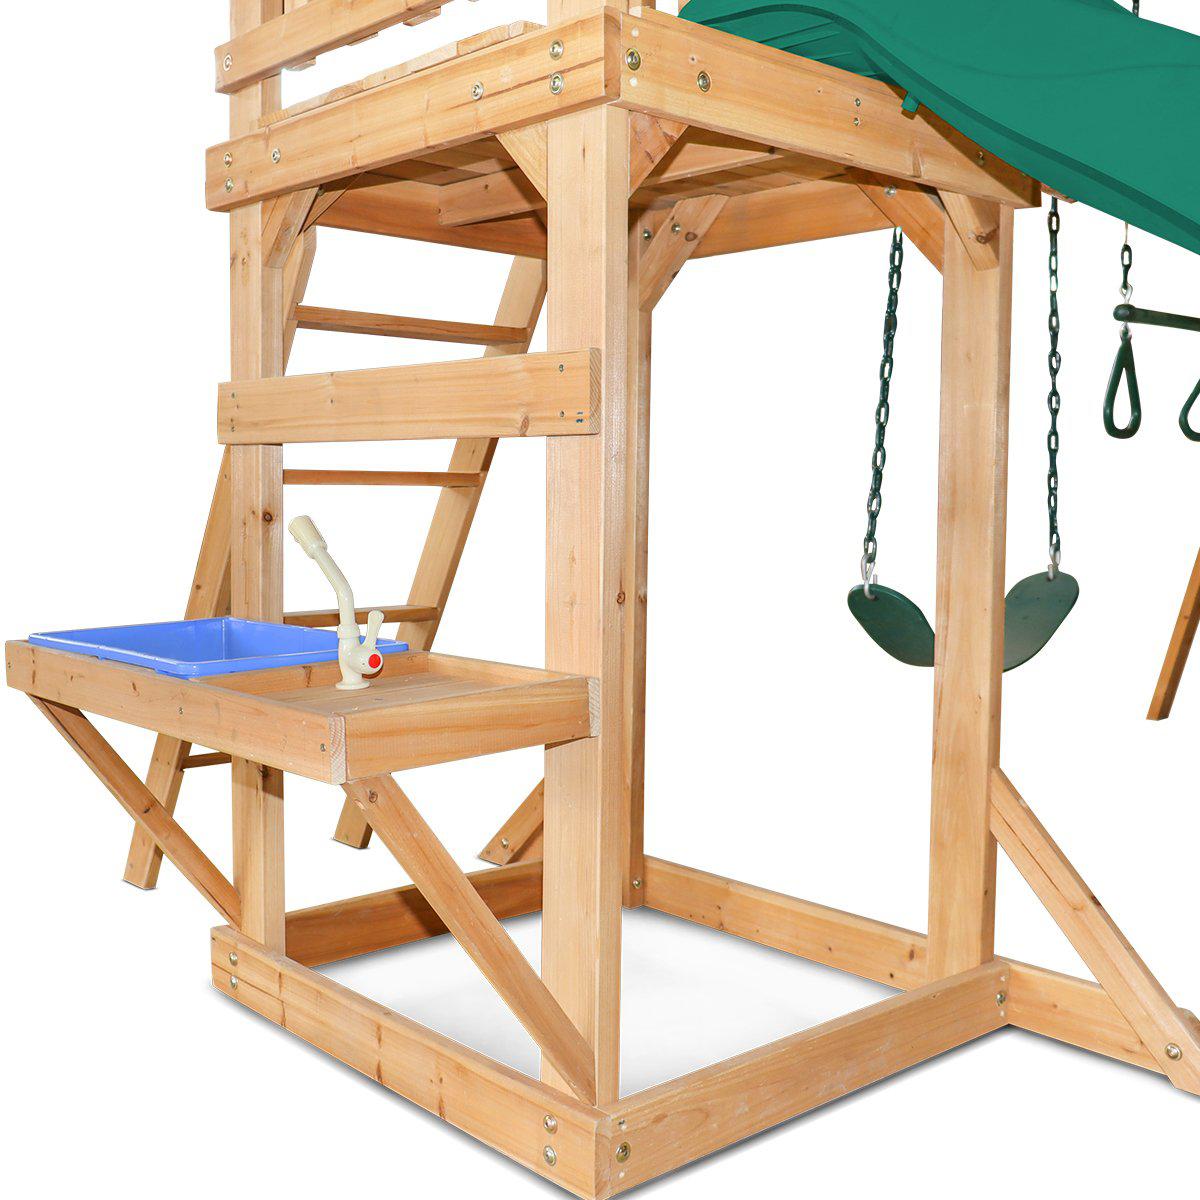 Albert Park Swing Set with Slide: Active Play and Healthy Recreation